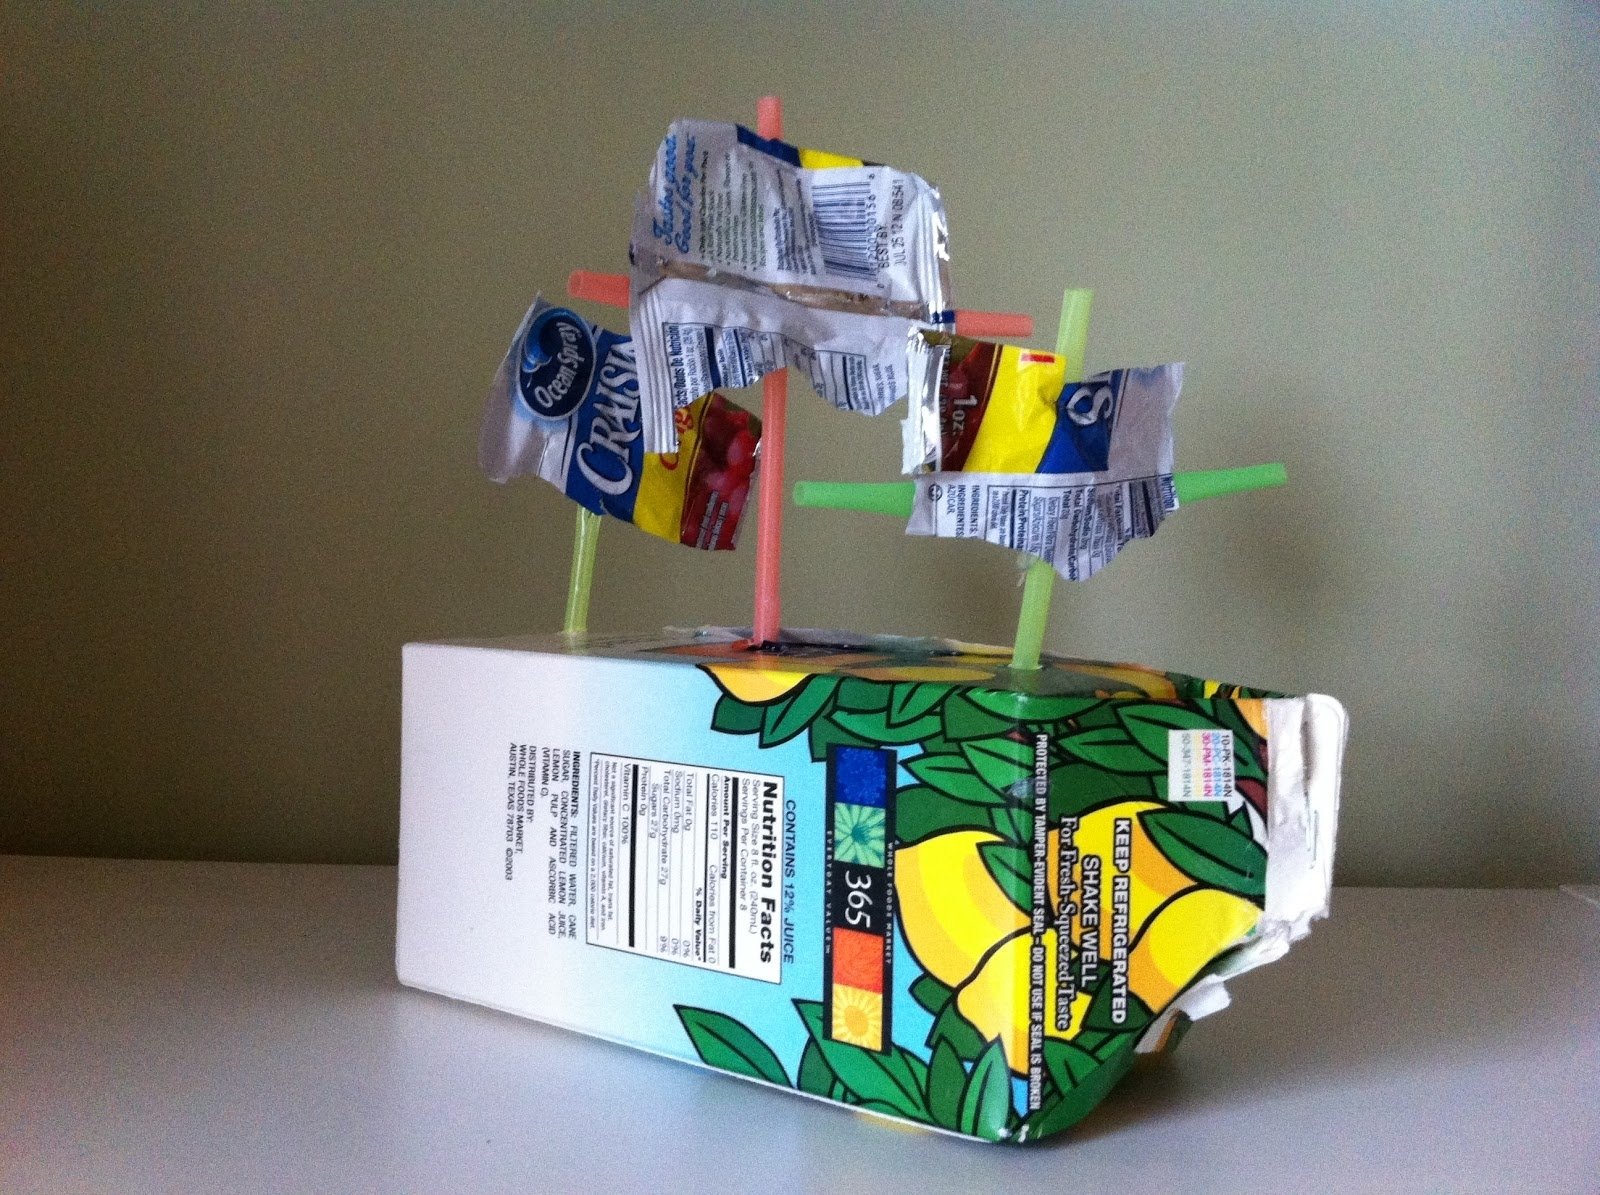 10 Awesome Recycled Projects For School Ideas childhood list recycling projects kids tierra este 9209 2022